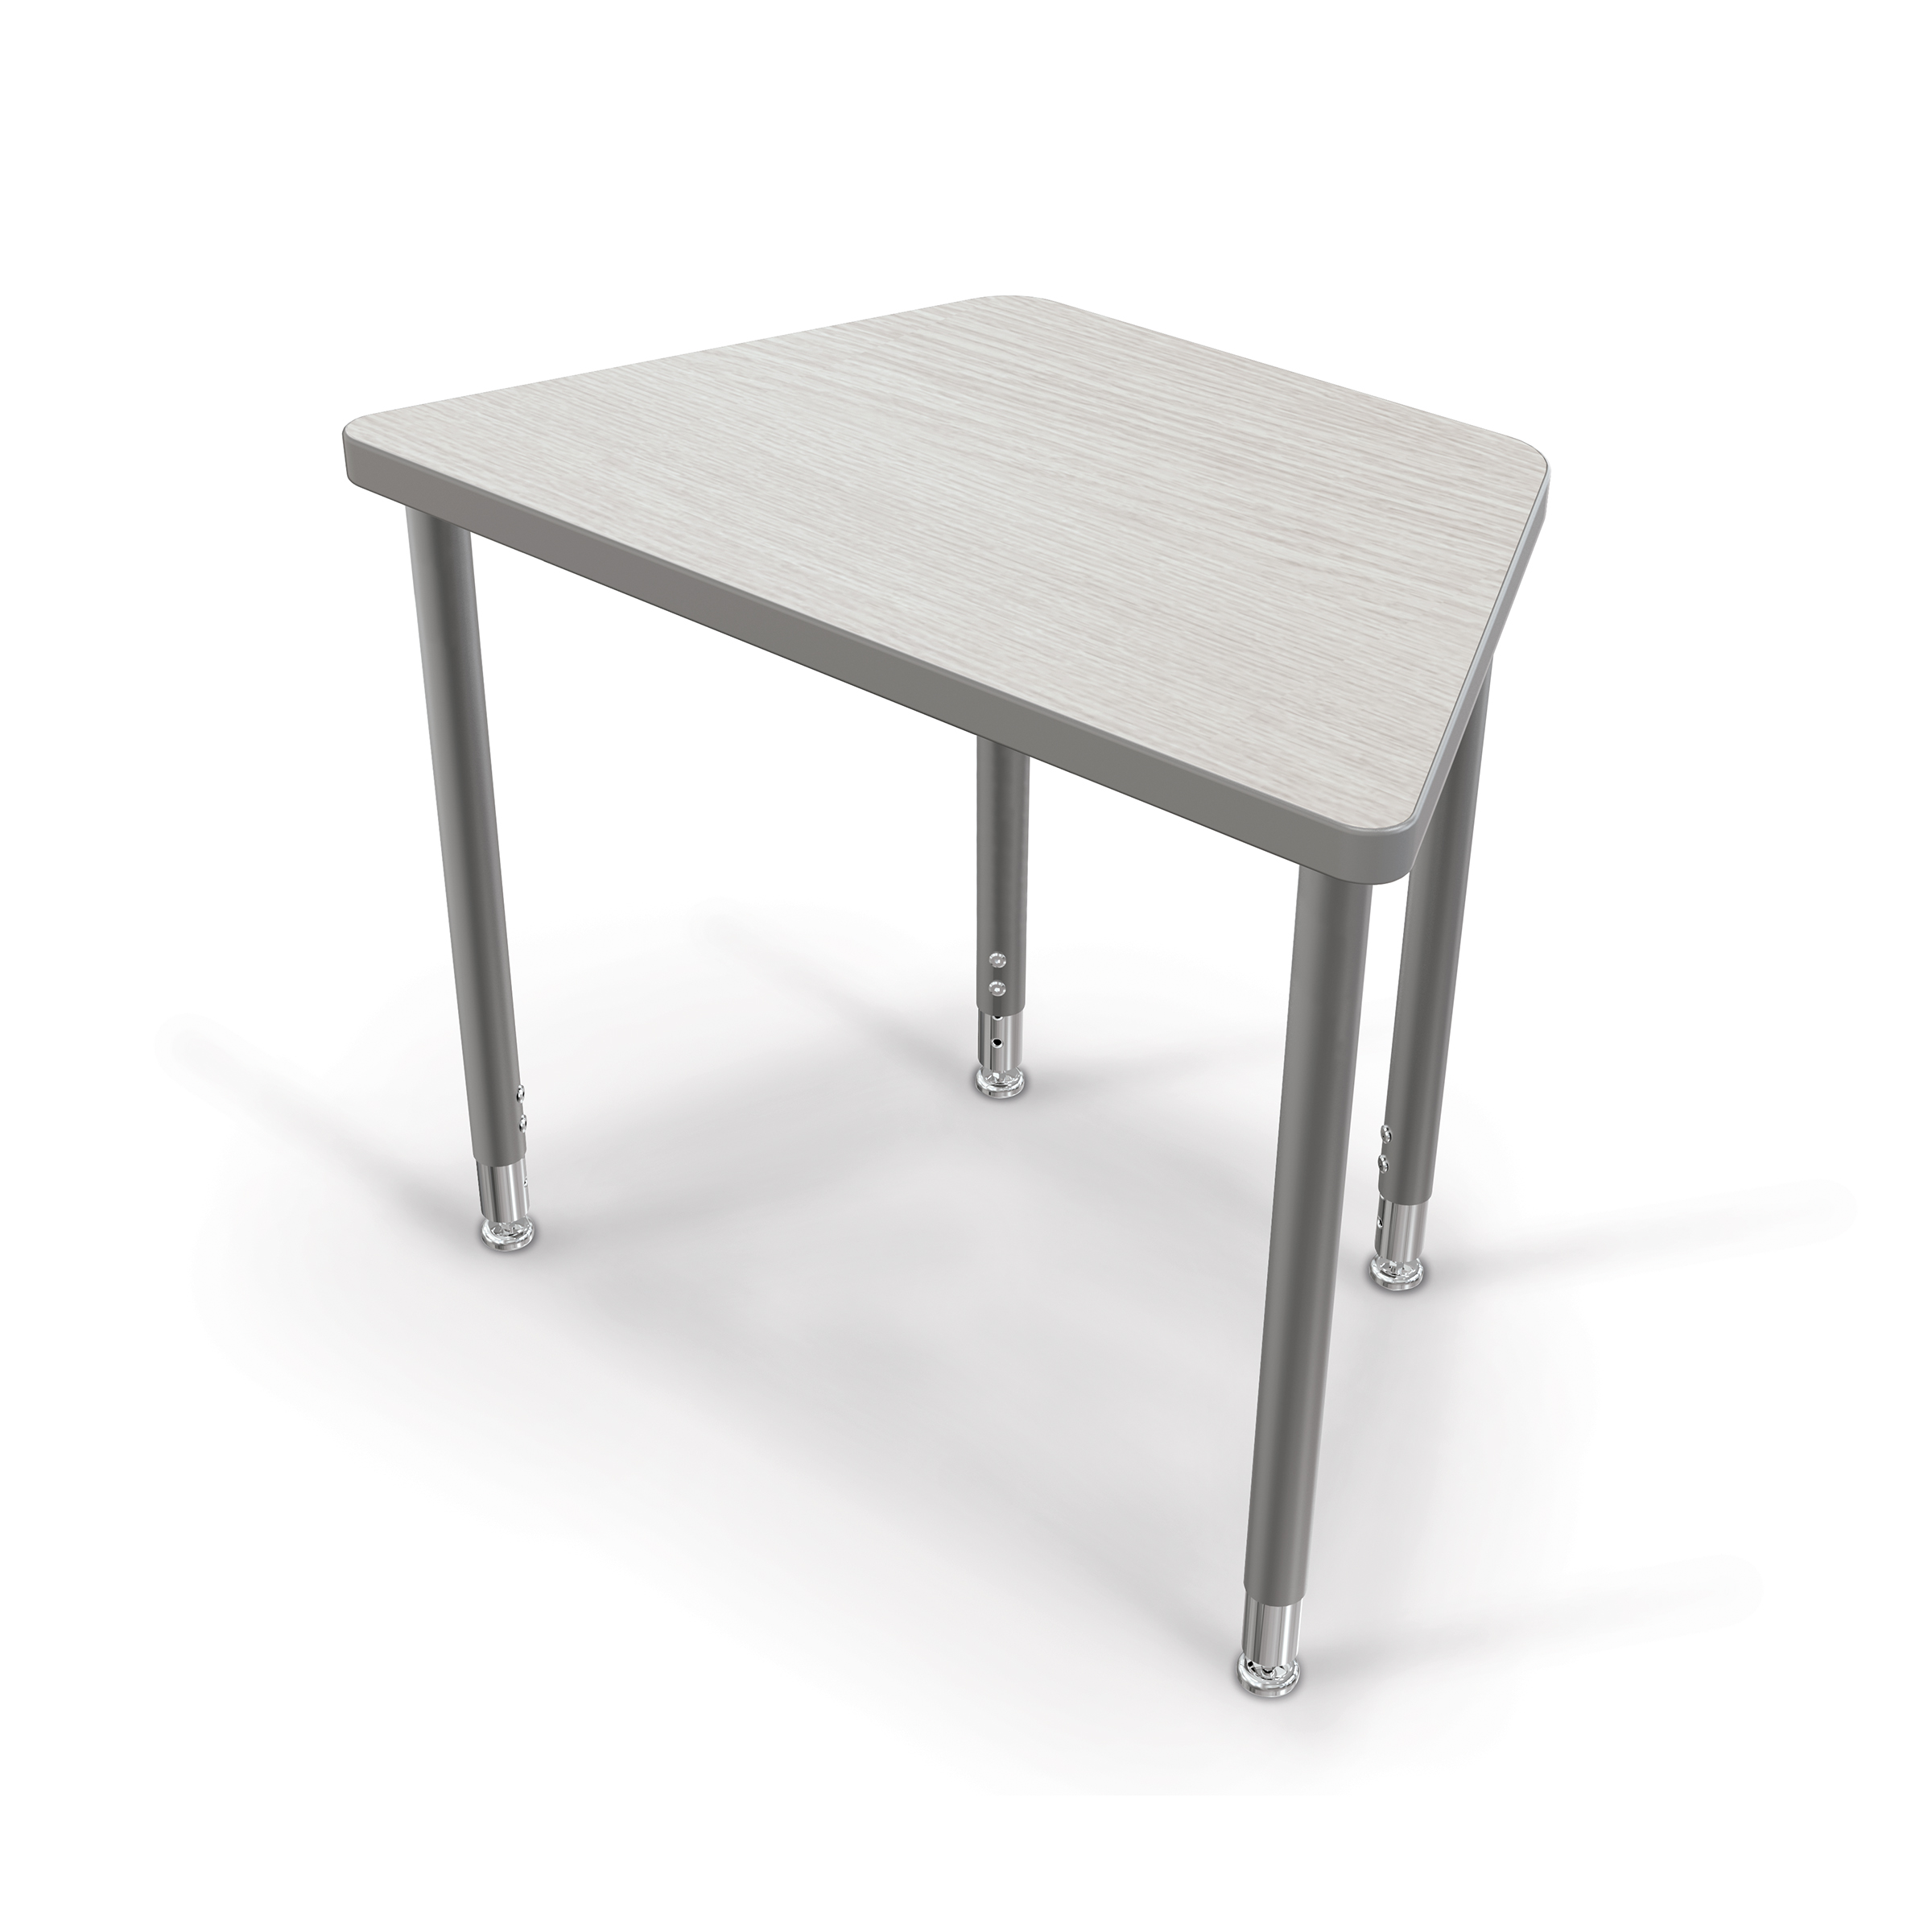 66284 Hierarchy Grow & Roll Student Desk Small Modesty Panel by Mooreco